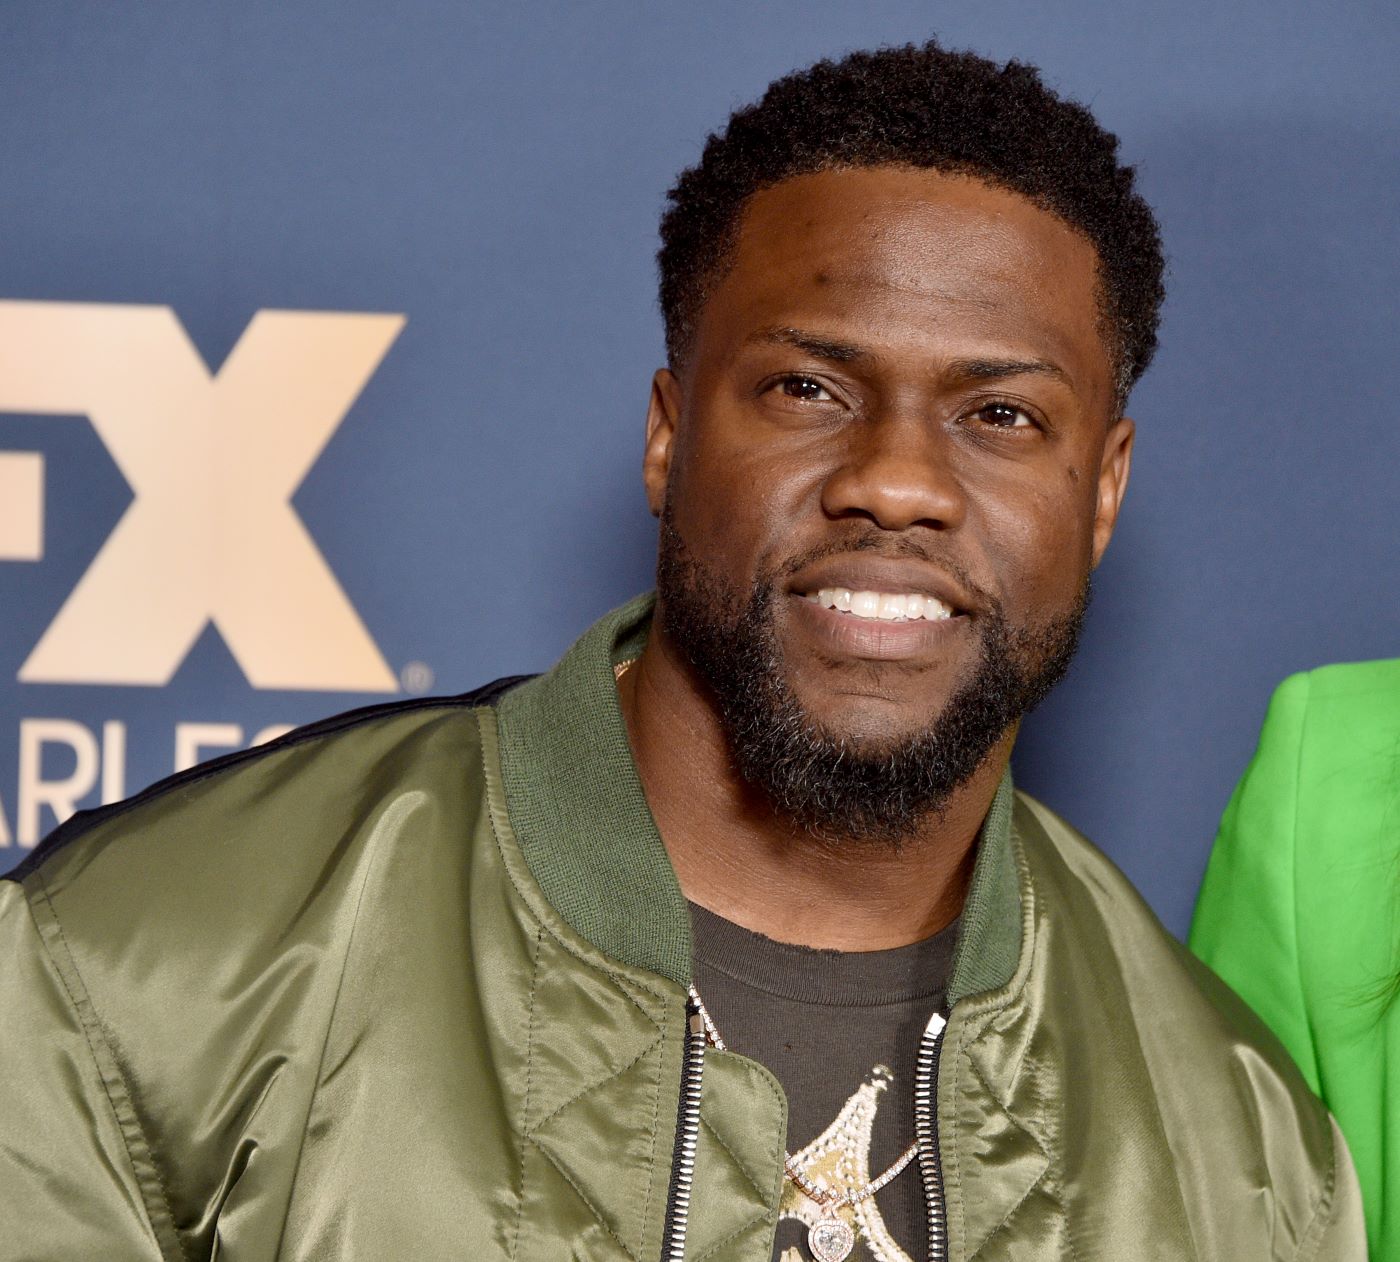 Kevin Hart dressed in a olive green shiny jacket with a darker green underneath in front of a blue background.